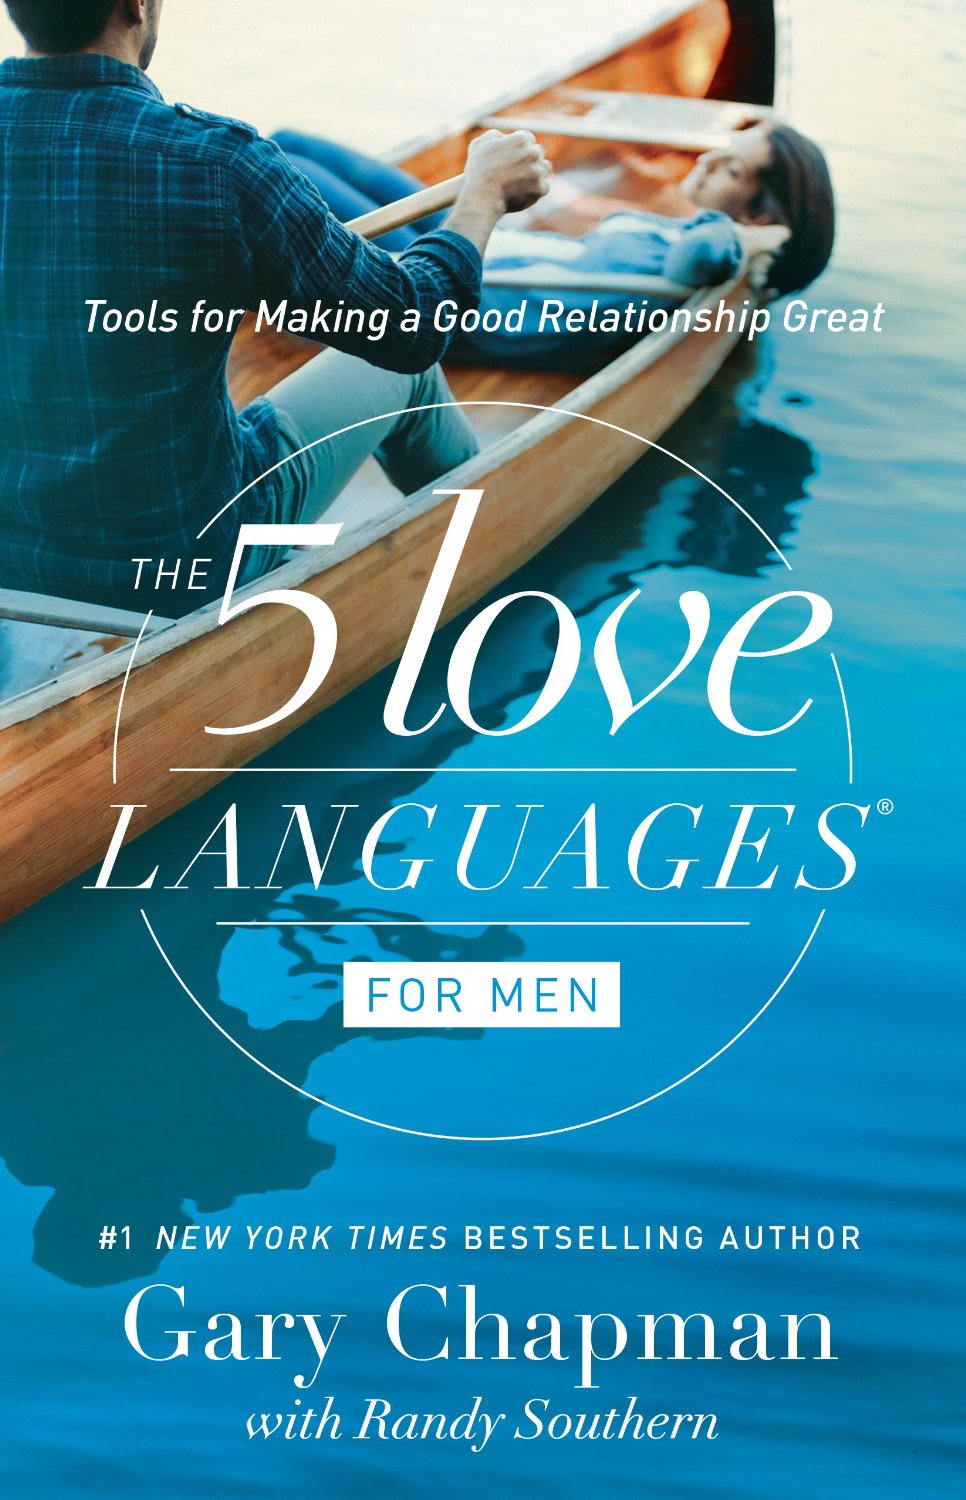 Book Review: The Five Love Languages for Men by Gary Chapman and Randy Southern